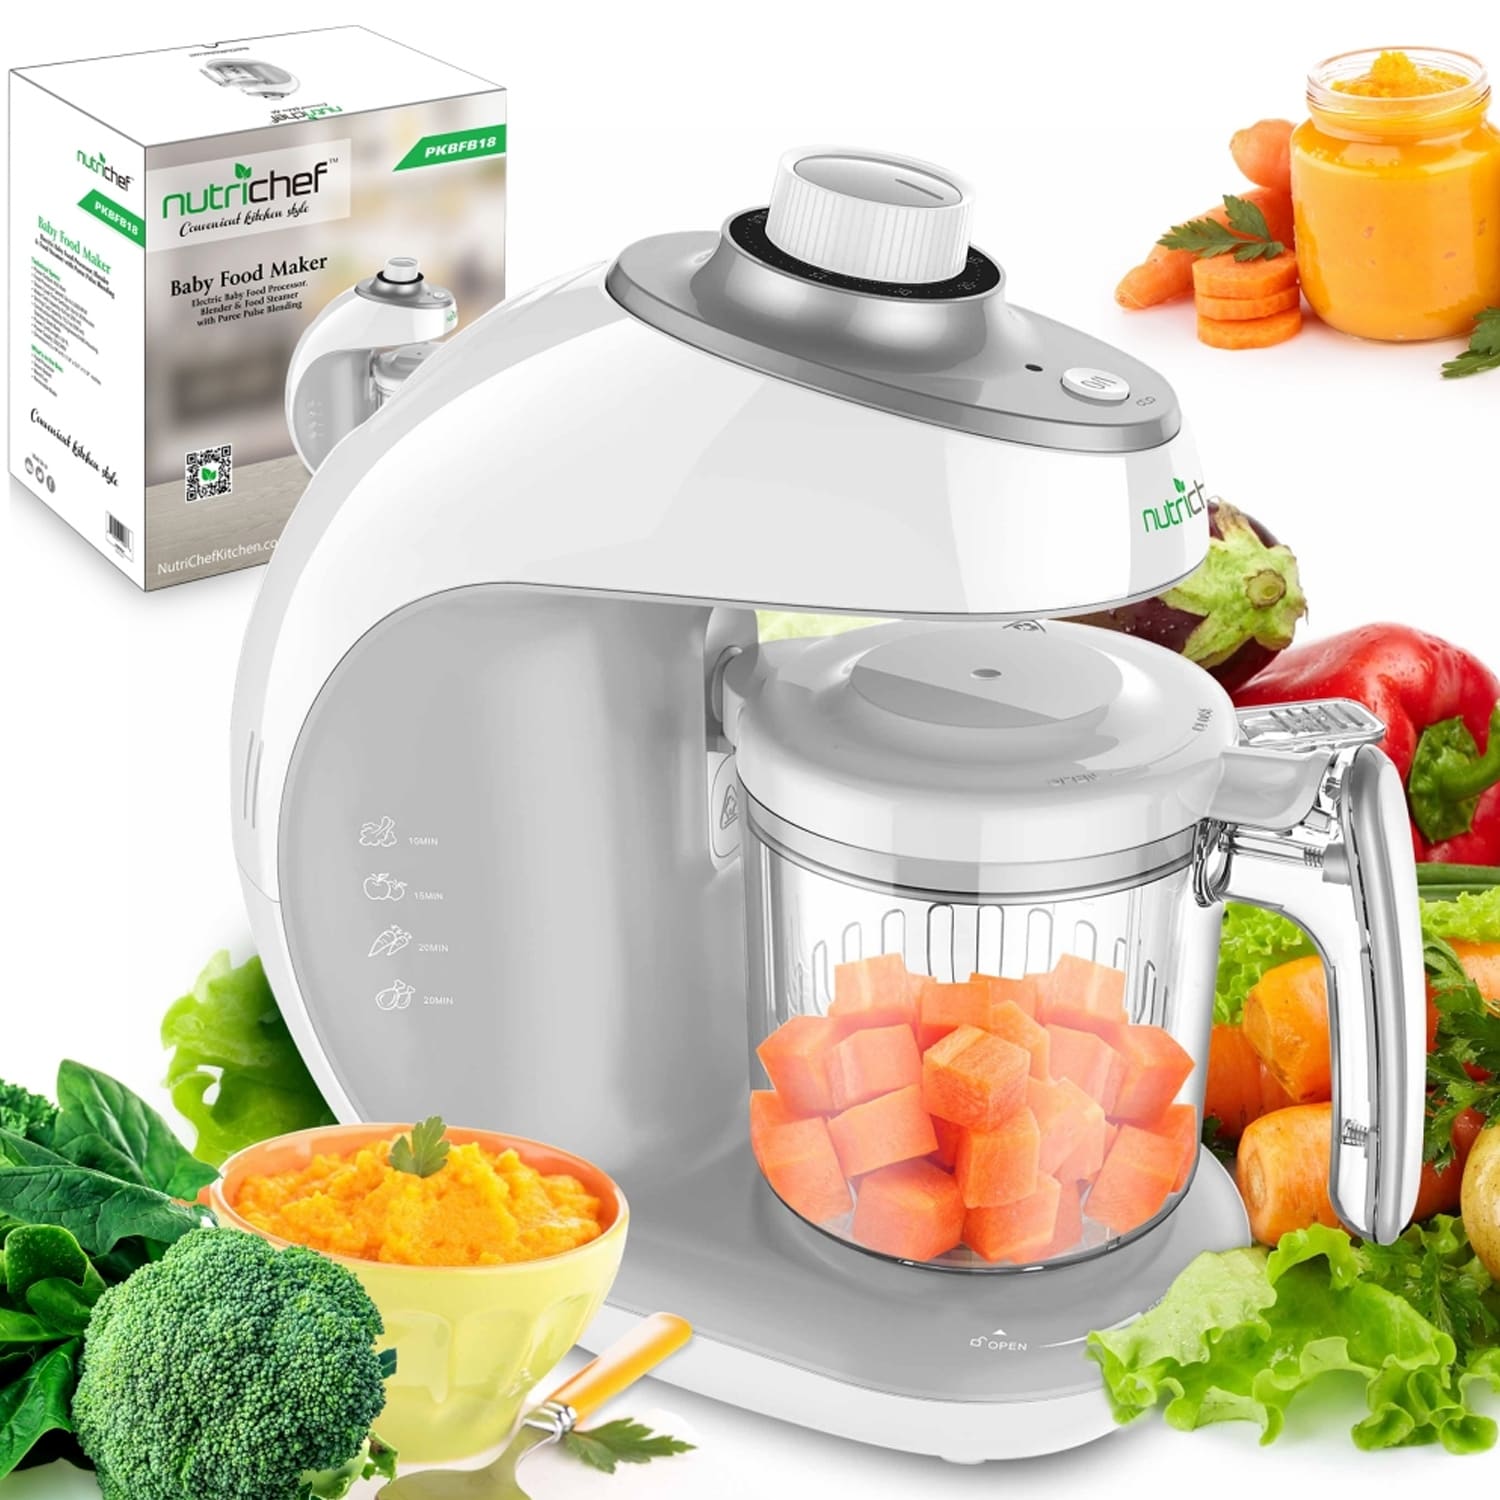 https://ak1.ostkcdn.com/images/products/is/images/direct/dc5ea25317f5dd9d5abc9aa55efa0e28601b78b8/NutriChef-Electric-Baby-Food-Maker-Puree-Food-Processor%2C-Blender%2C-and-Steamer.jpg